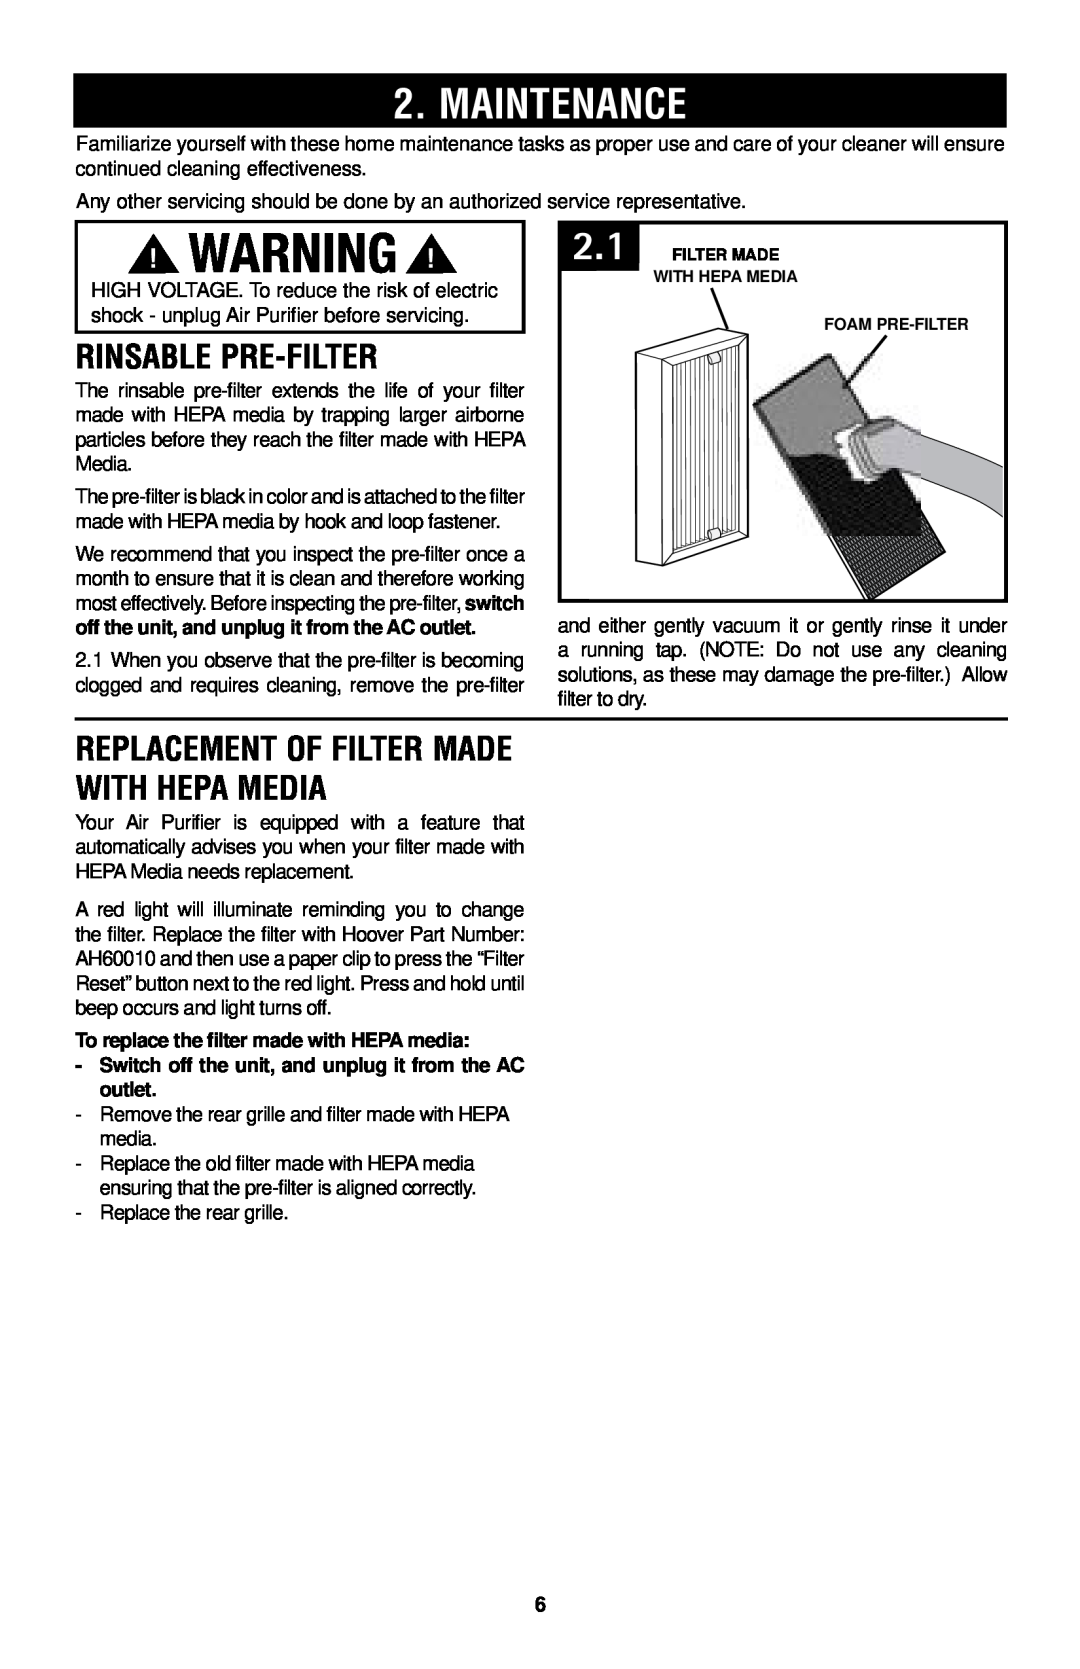 Hoover WH10100 owner manual MaintenanCe, rinsable Pre-filter, rePlaCeMent of filter Made witH HePa Media 